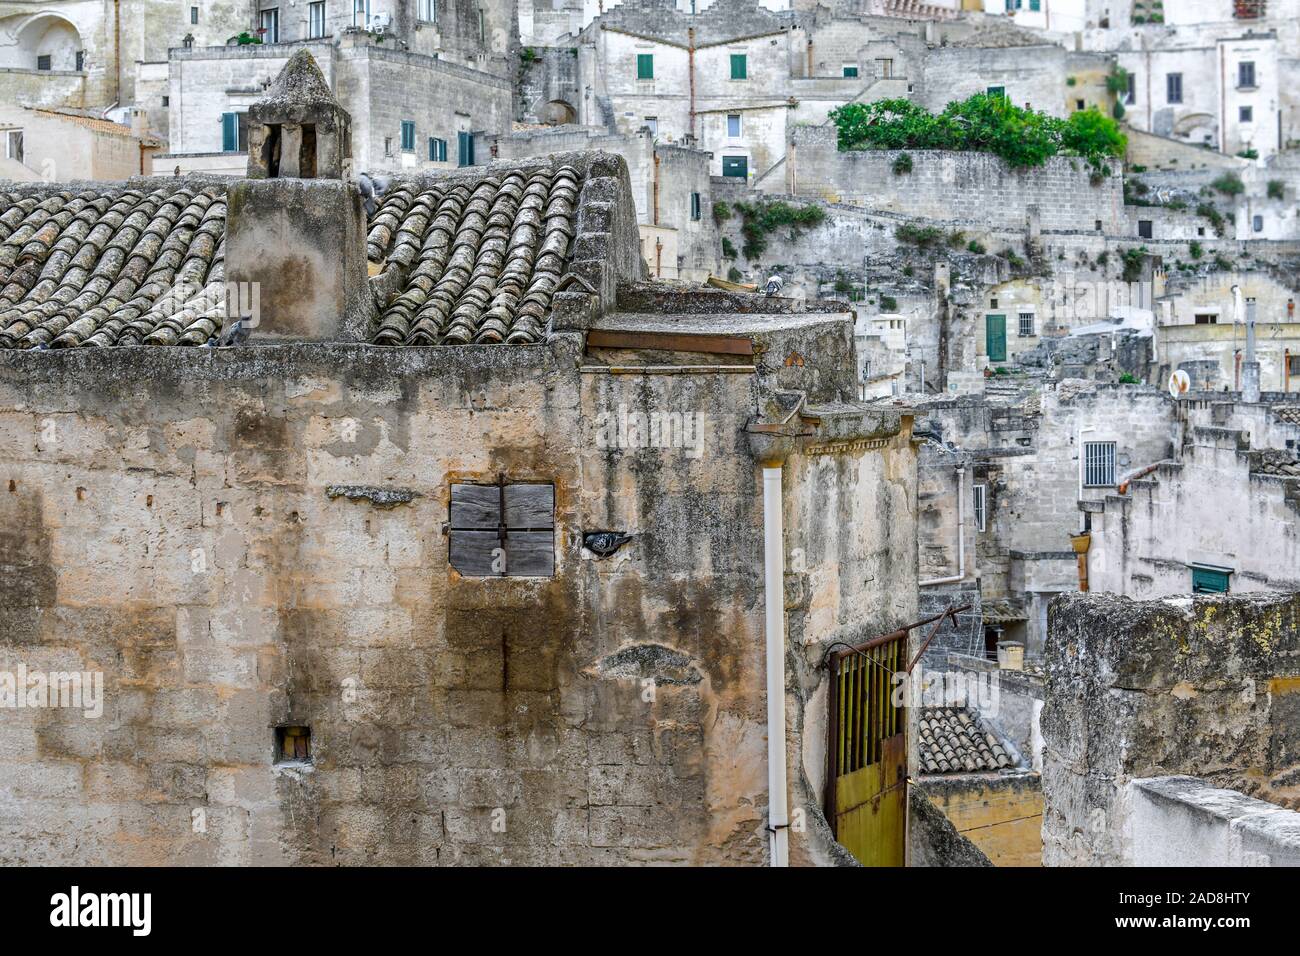 A pigeon fits perfectly inside a worn away stone roost in an ancient stone wall in the village of Matera, Italy, in the Southern region of Basilicata. Stock Photo